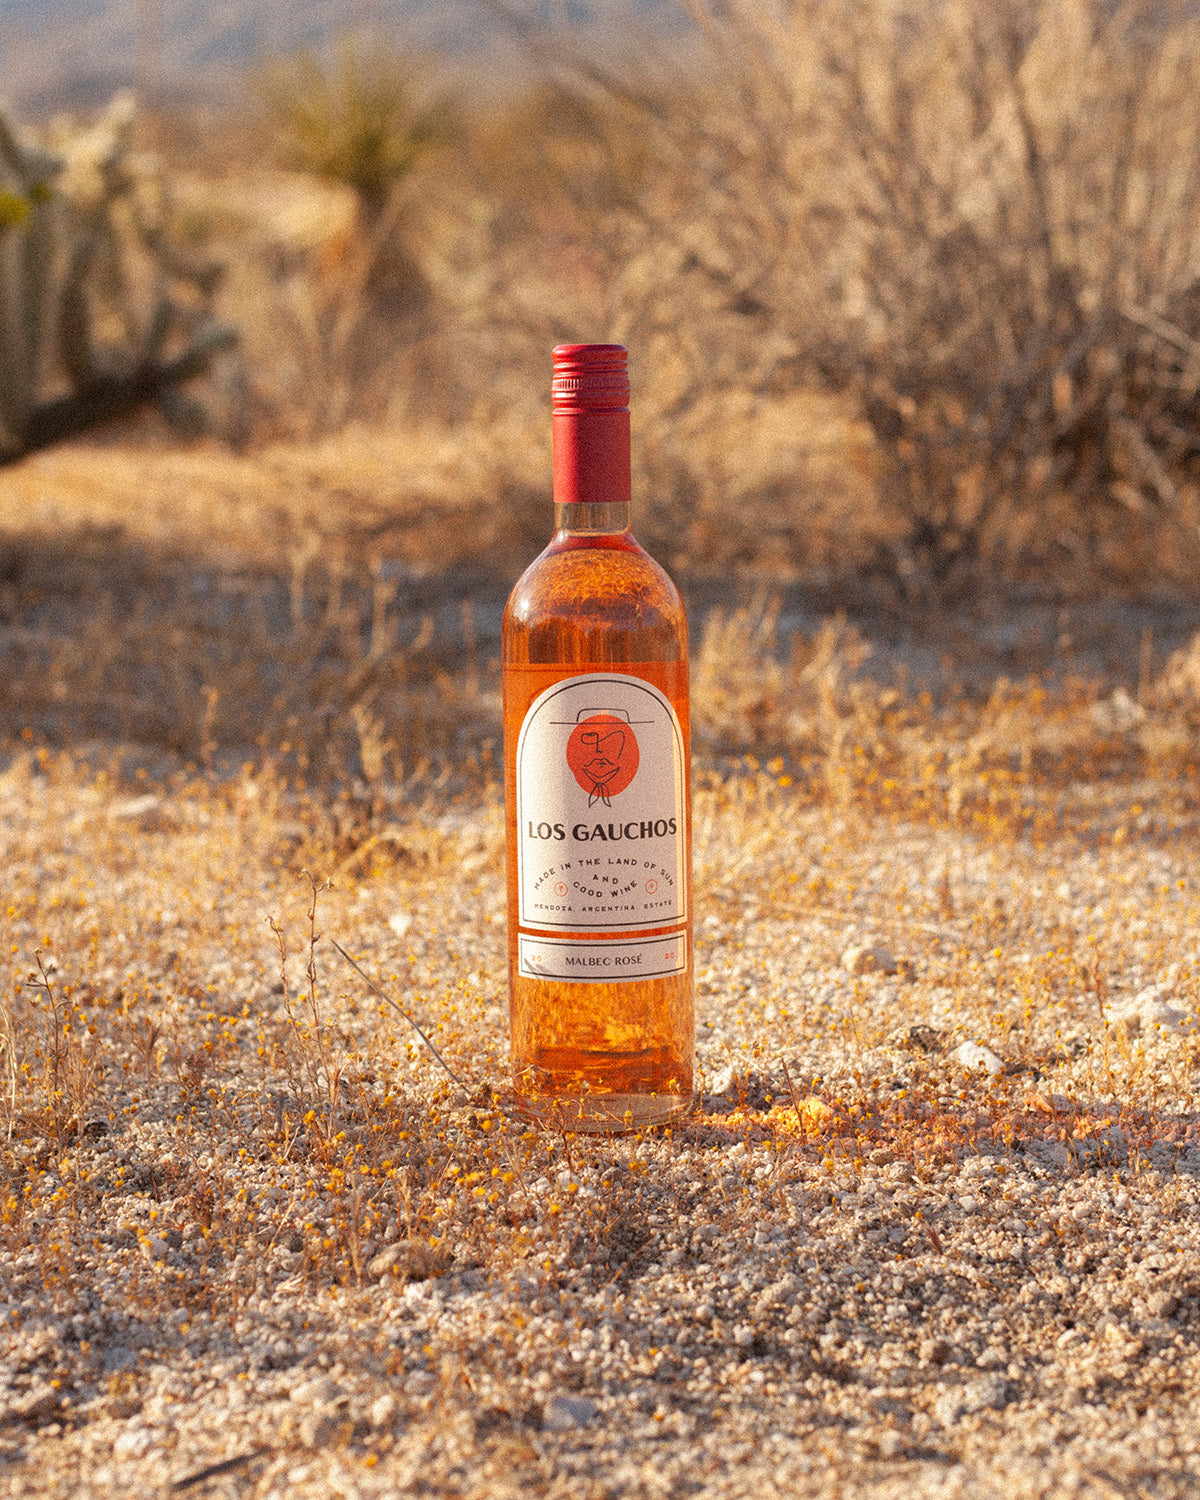 Featured product image displaying Los Gaucho's Malbec Rosé